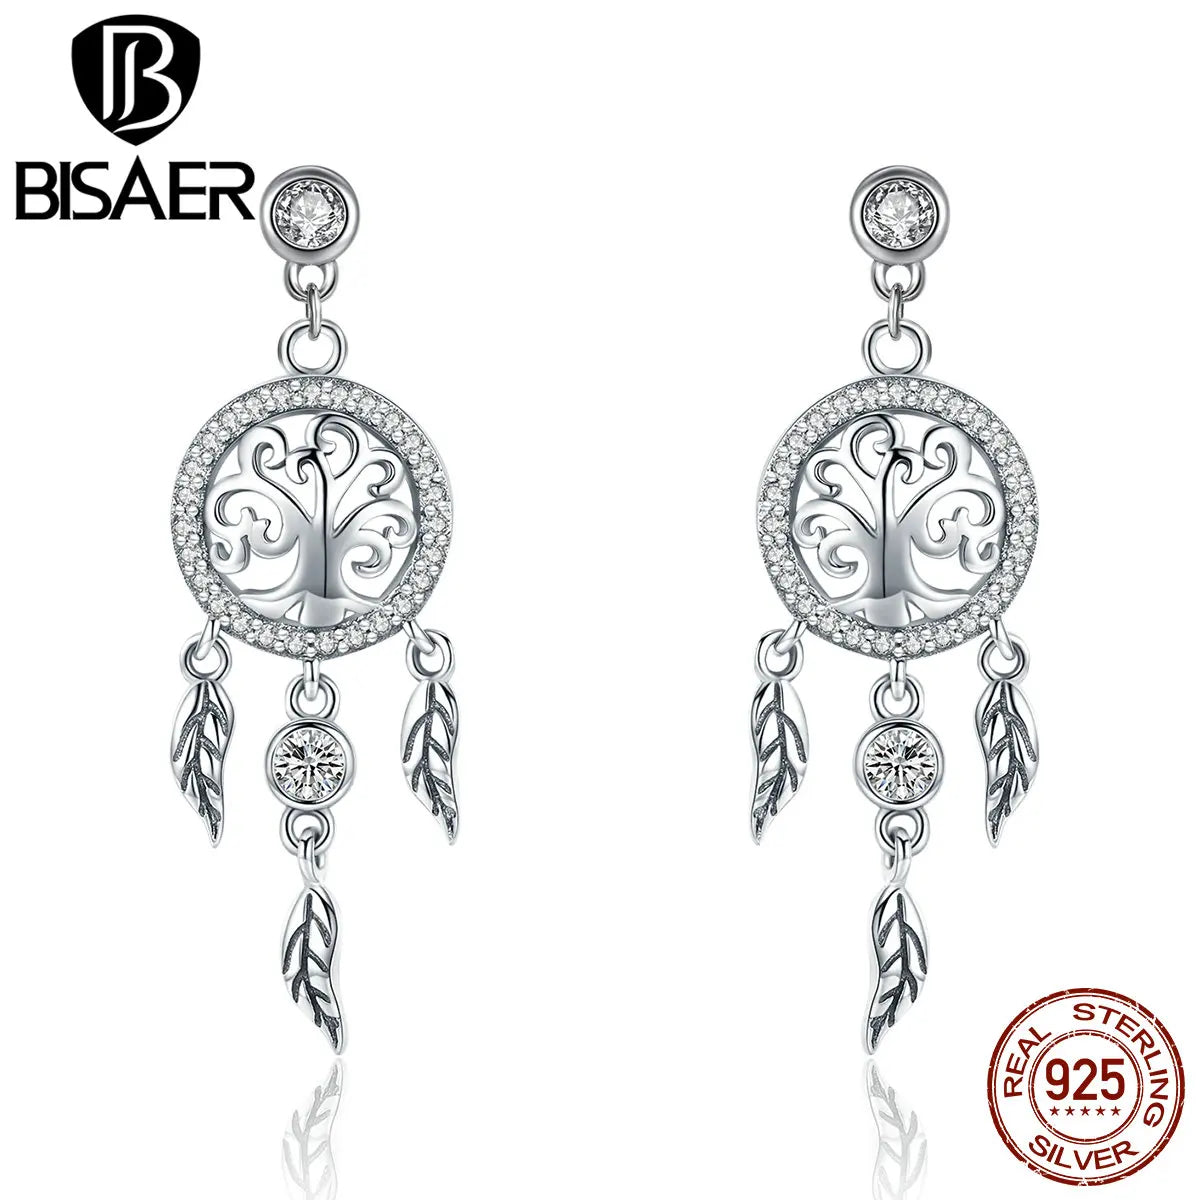 BISAER Vintage 925 Silver Dream Catcher Necklace and Earring Set